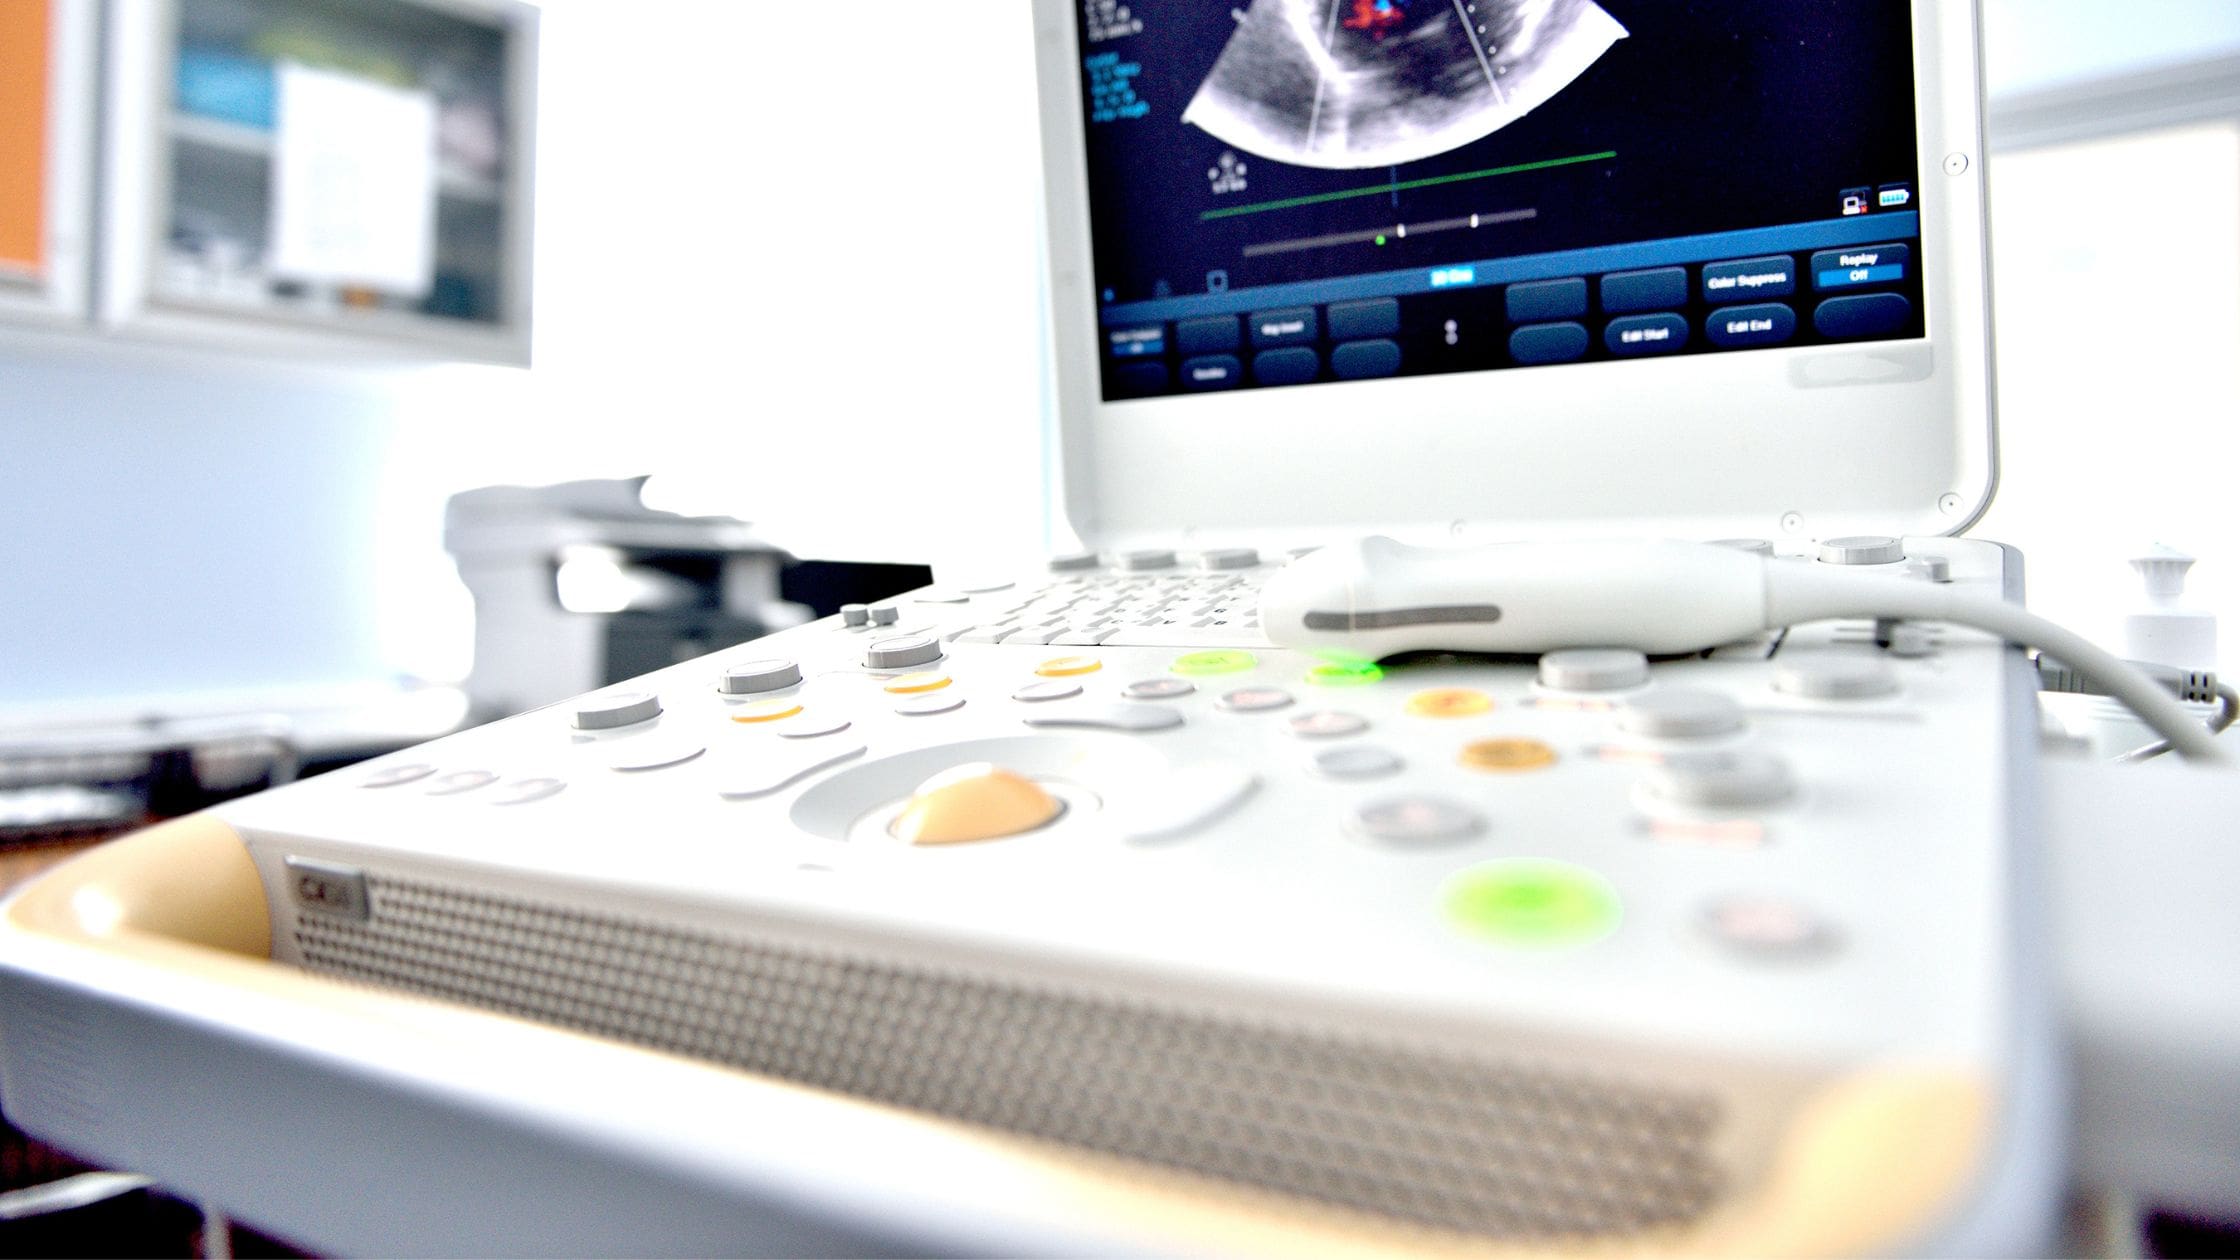 Ultrasound Buyer’s Guide – How to Choose an Ultrasound System or Machine